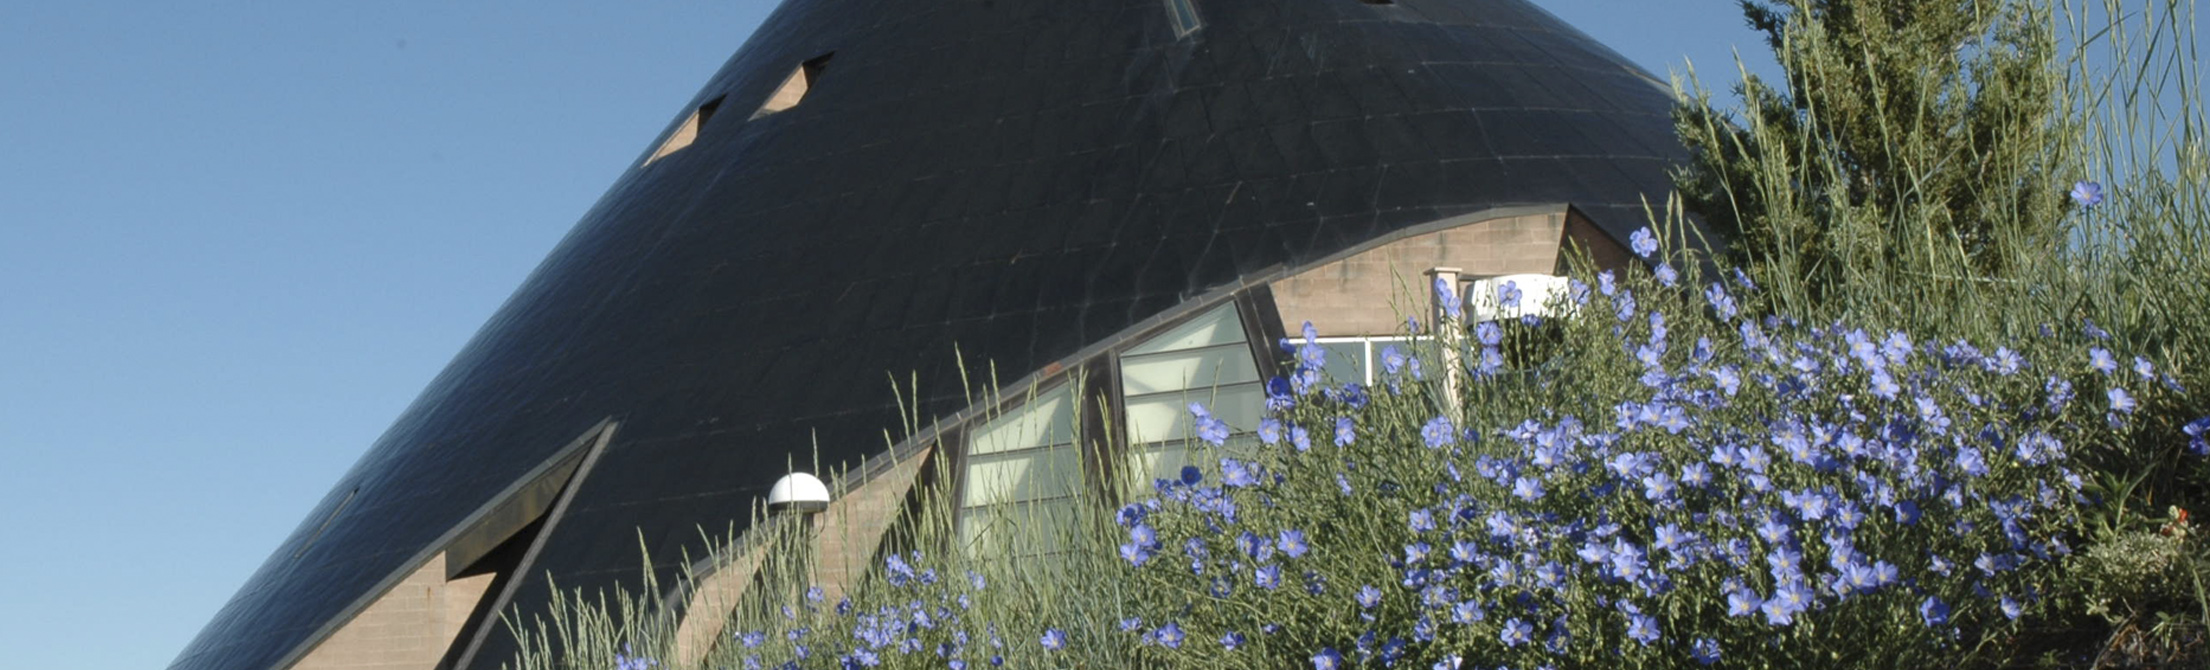 American Heritage Center cone building with blue flaux flowers